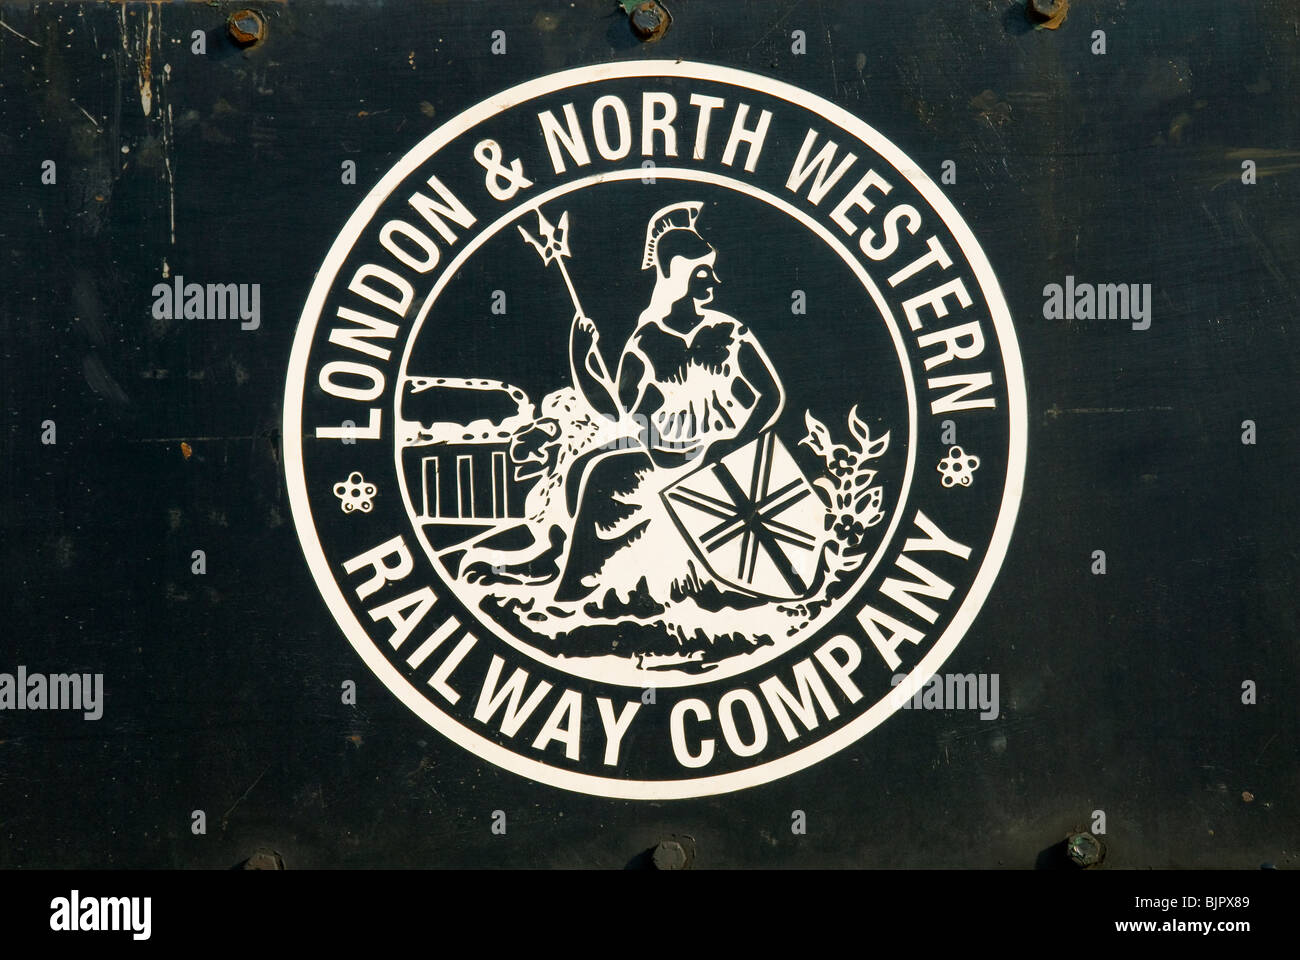 London and North Western Railway Company logo on a steam locomotive at ...